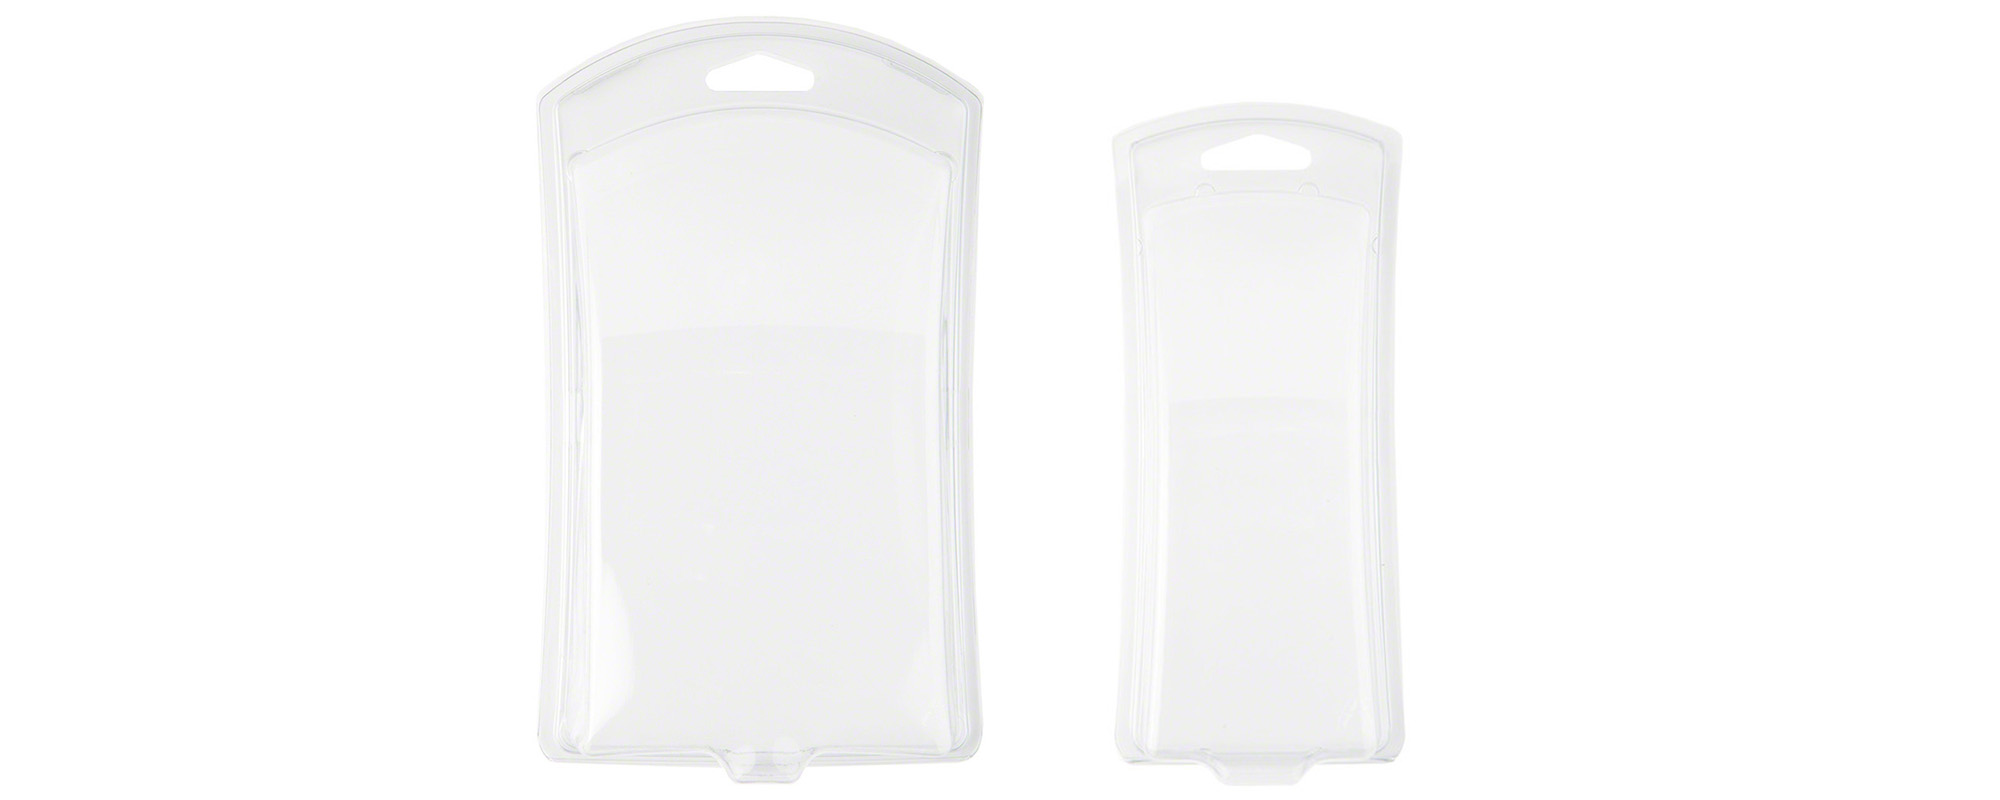 Clamshell Package / Storage Containers with Curved Front